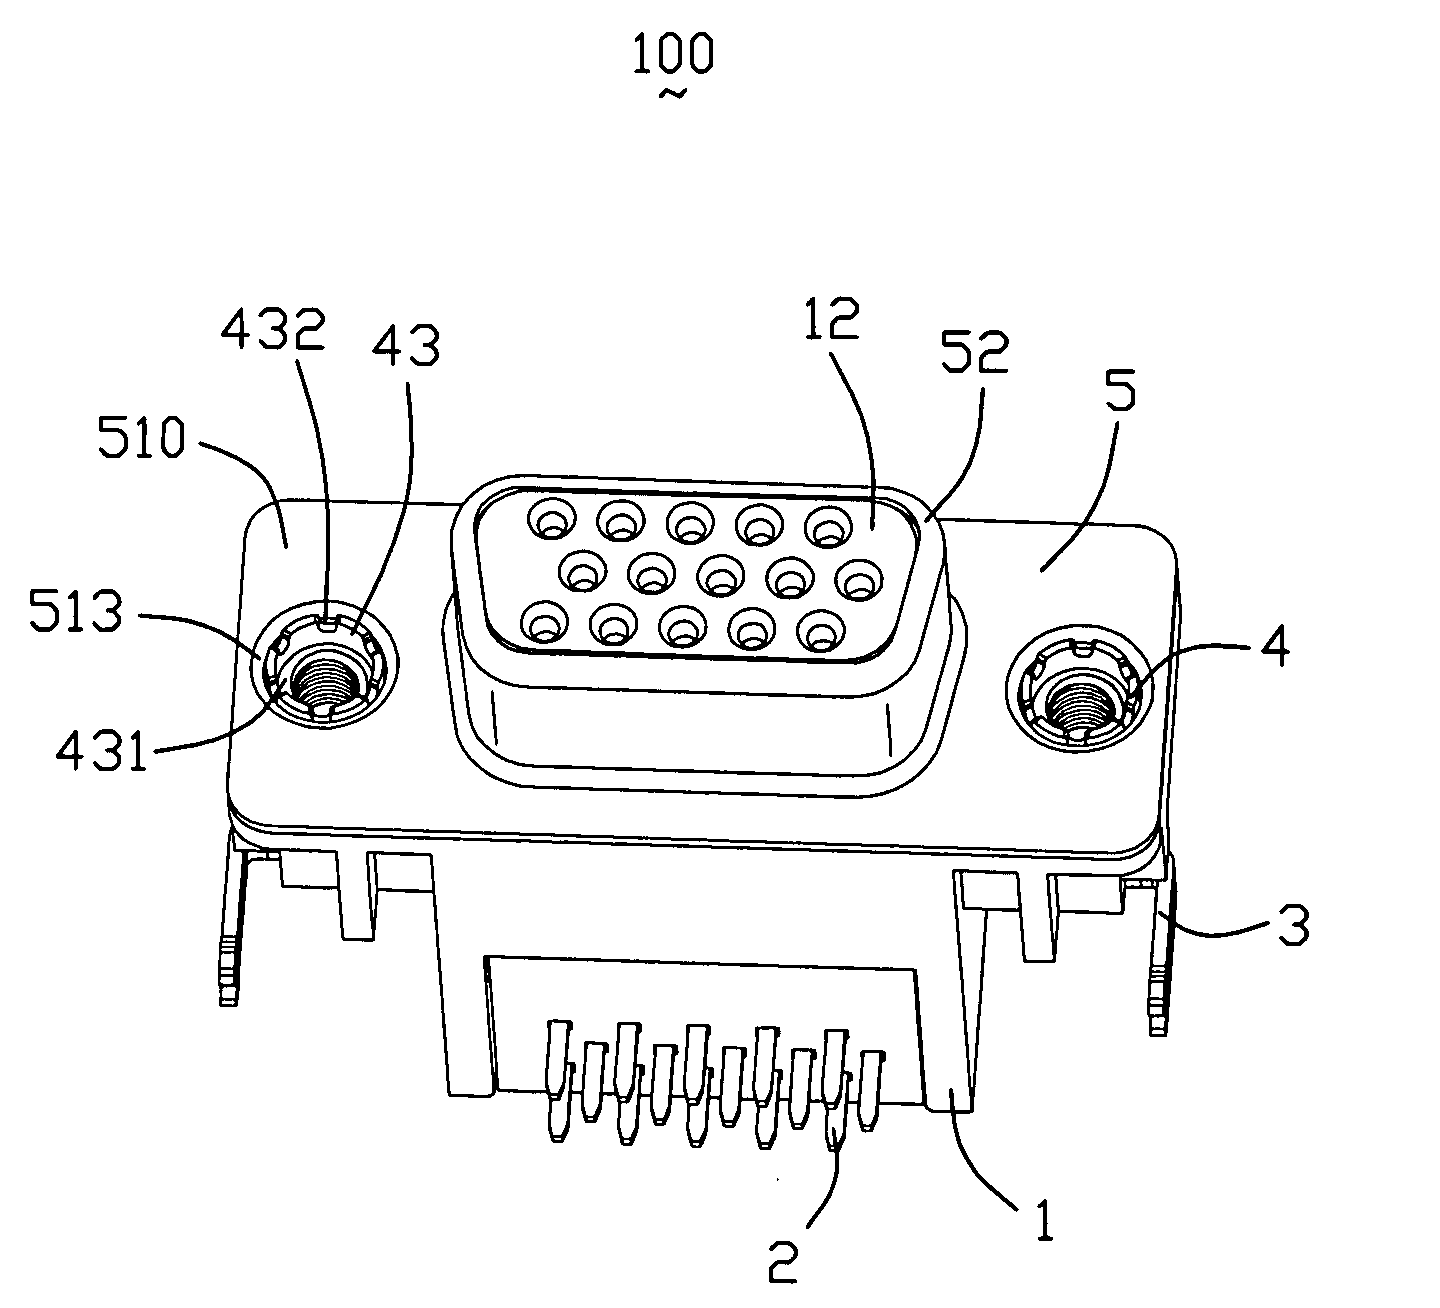 Electrical connector with improved fastener